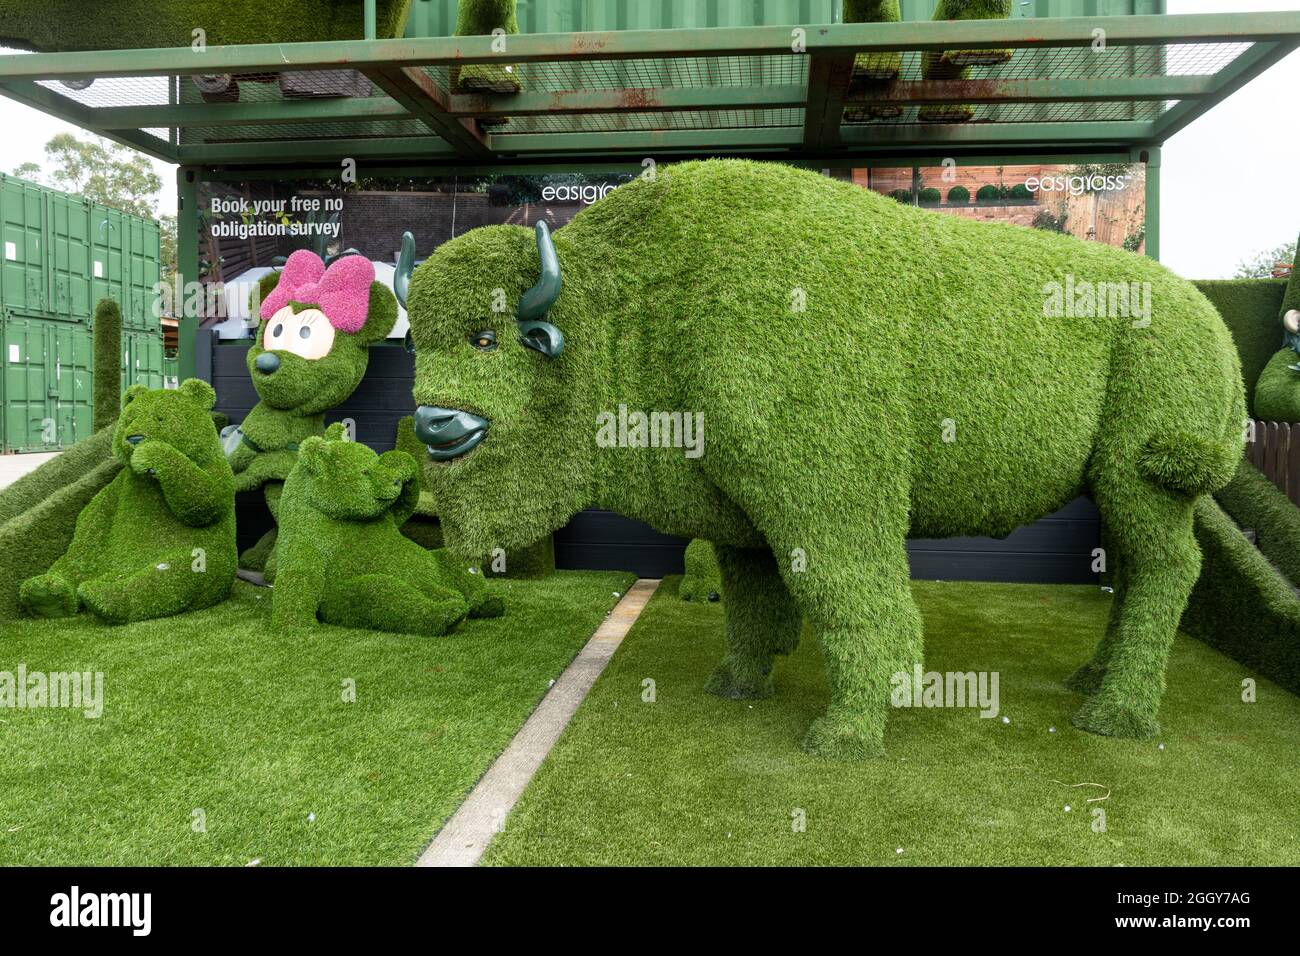 Easigrass artificial grass animals (Easi-animals, animal sculptures covered  with plastic grass), UK Stock Photo - Alamy